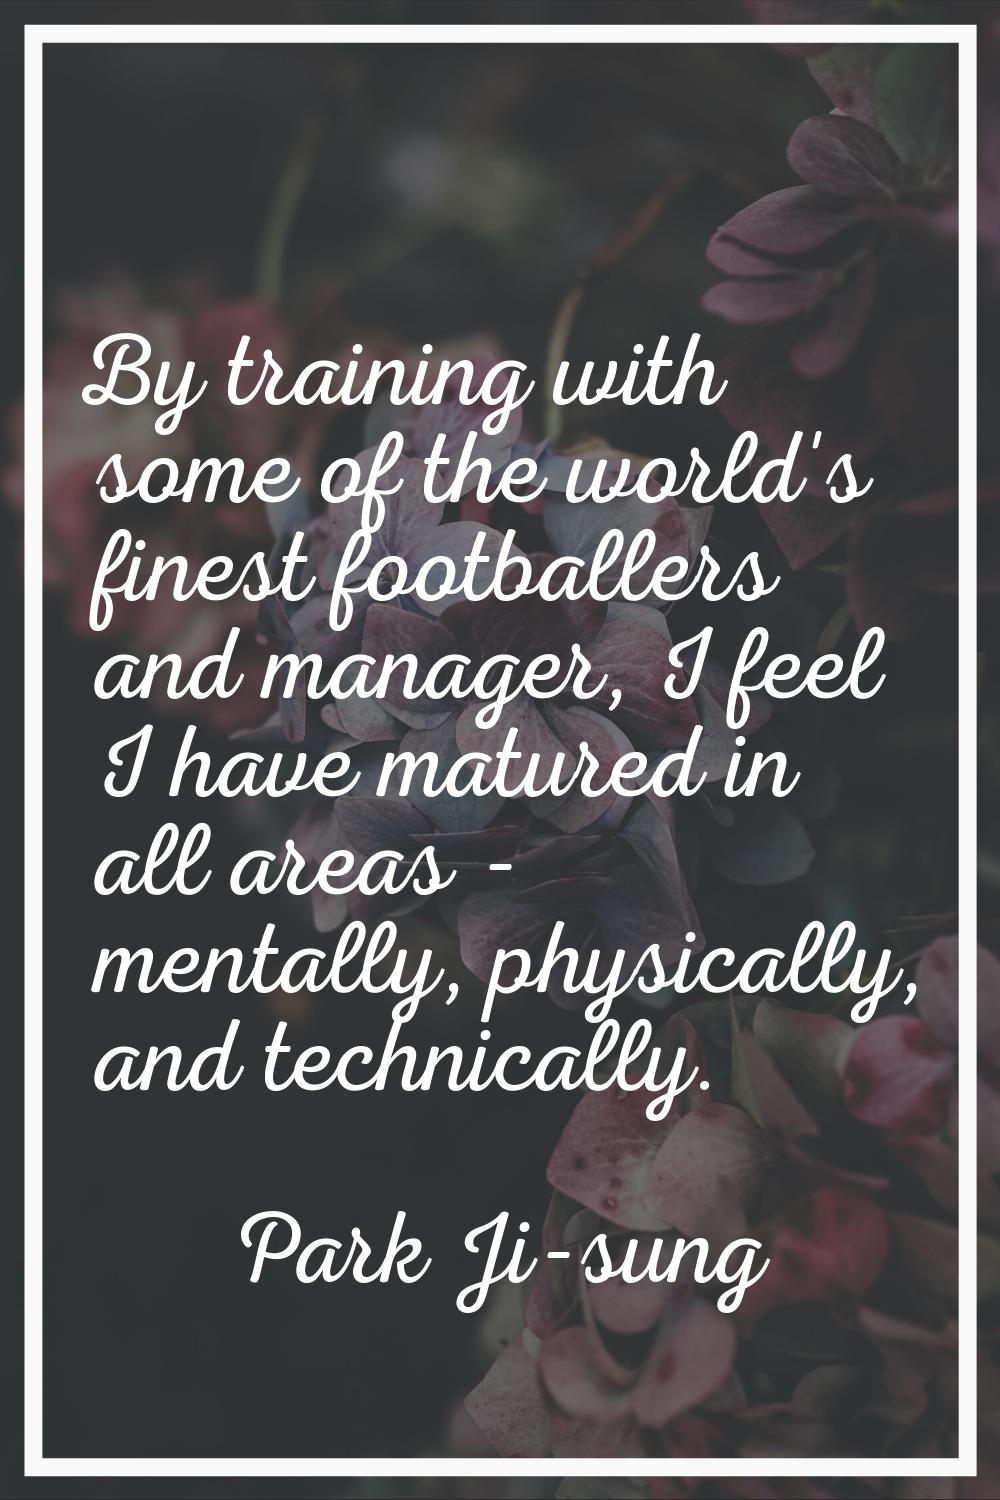 By training with some of the world's finest footballers and manager, I feel I have matured in all a